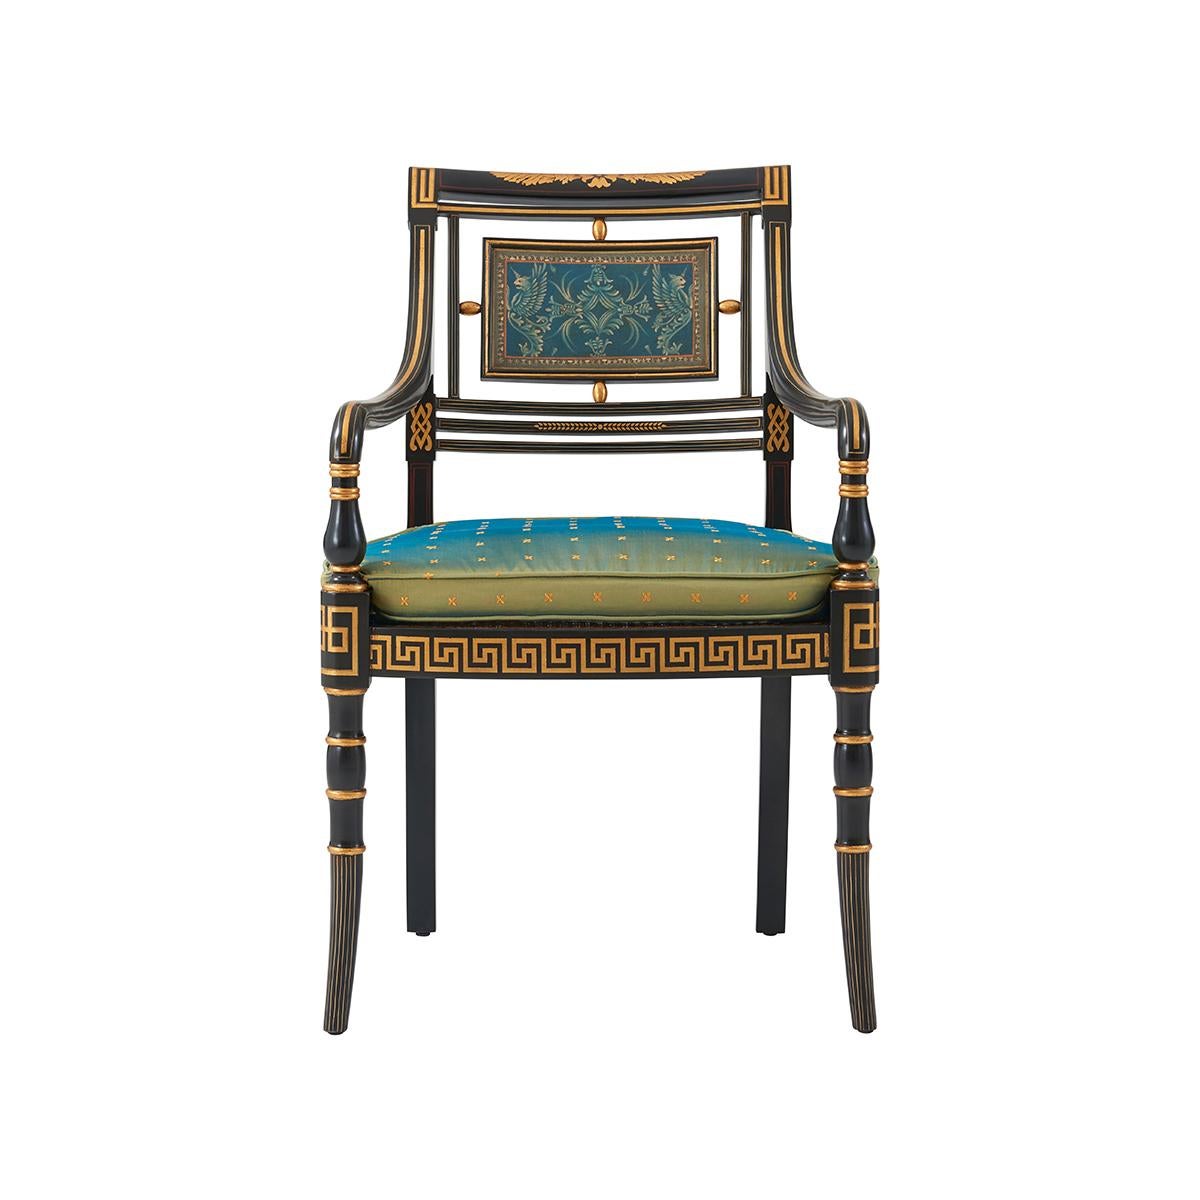 A Regency style ebonized and parcel-gilt open armchair, the over scrolled back centered by a painted rectangular panel, with a caned and cushion on a Greek key seat rail and on ring turned tapering. The original Regency, circa 1820.

Shown in